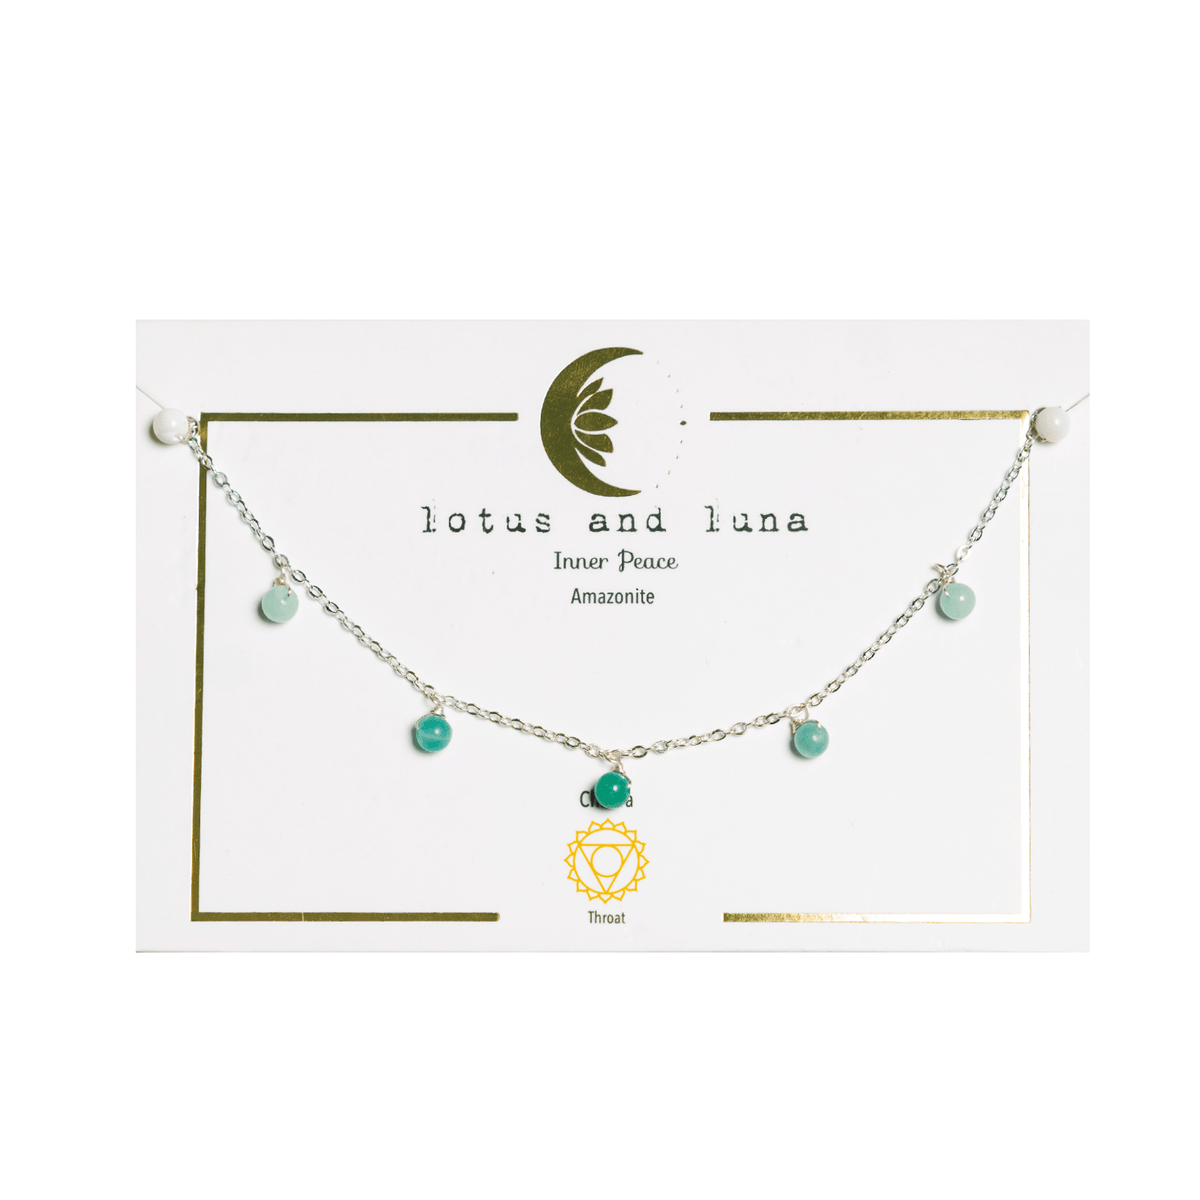 Silver chain necklace with green stone dewdrop charms on packaging